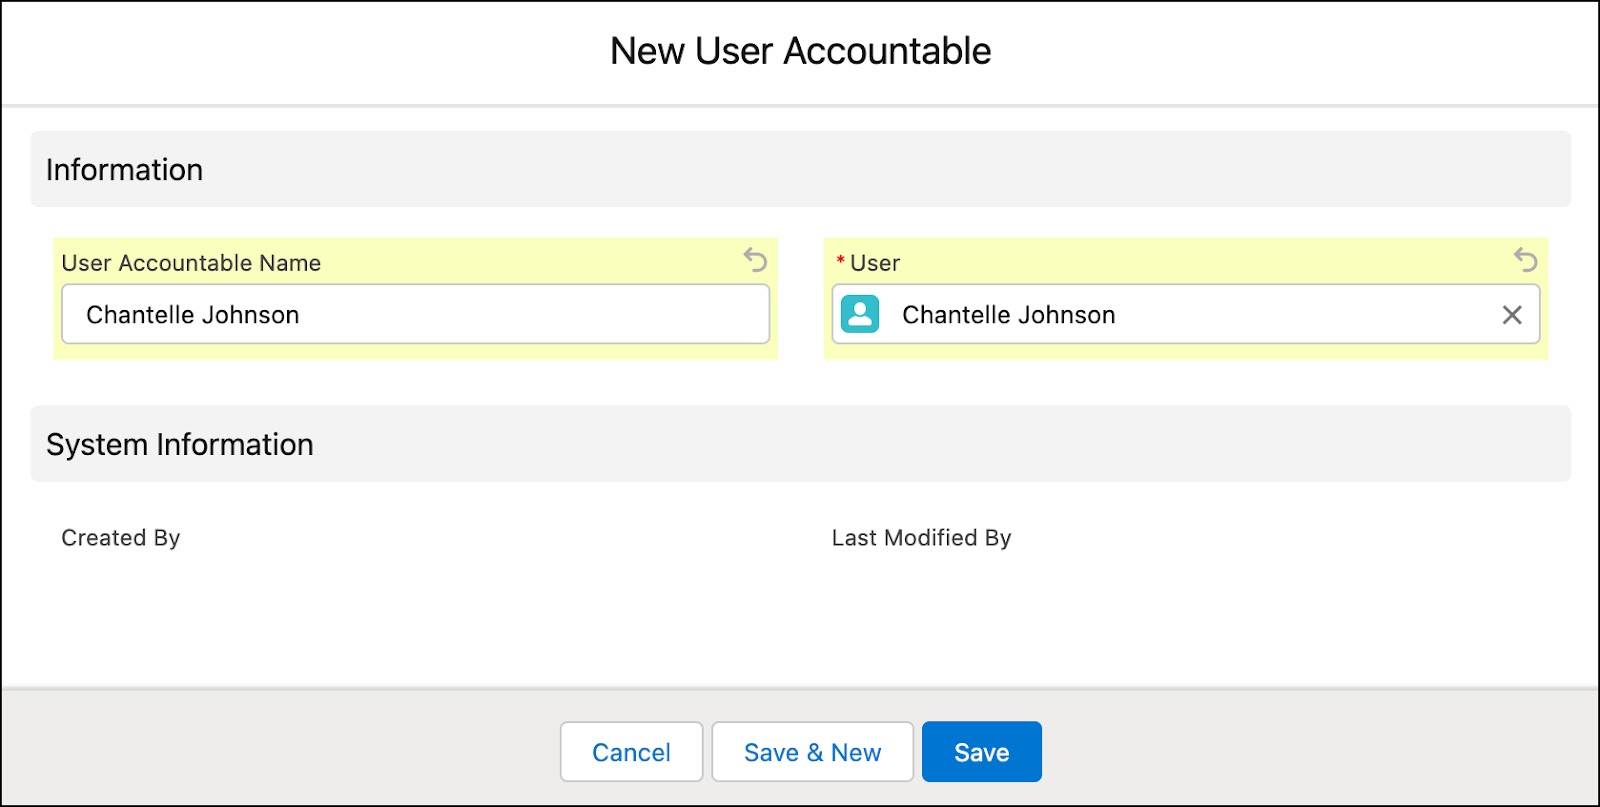 The New User Accountable window showing the options to create a user accountable record.